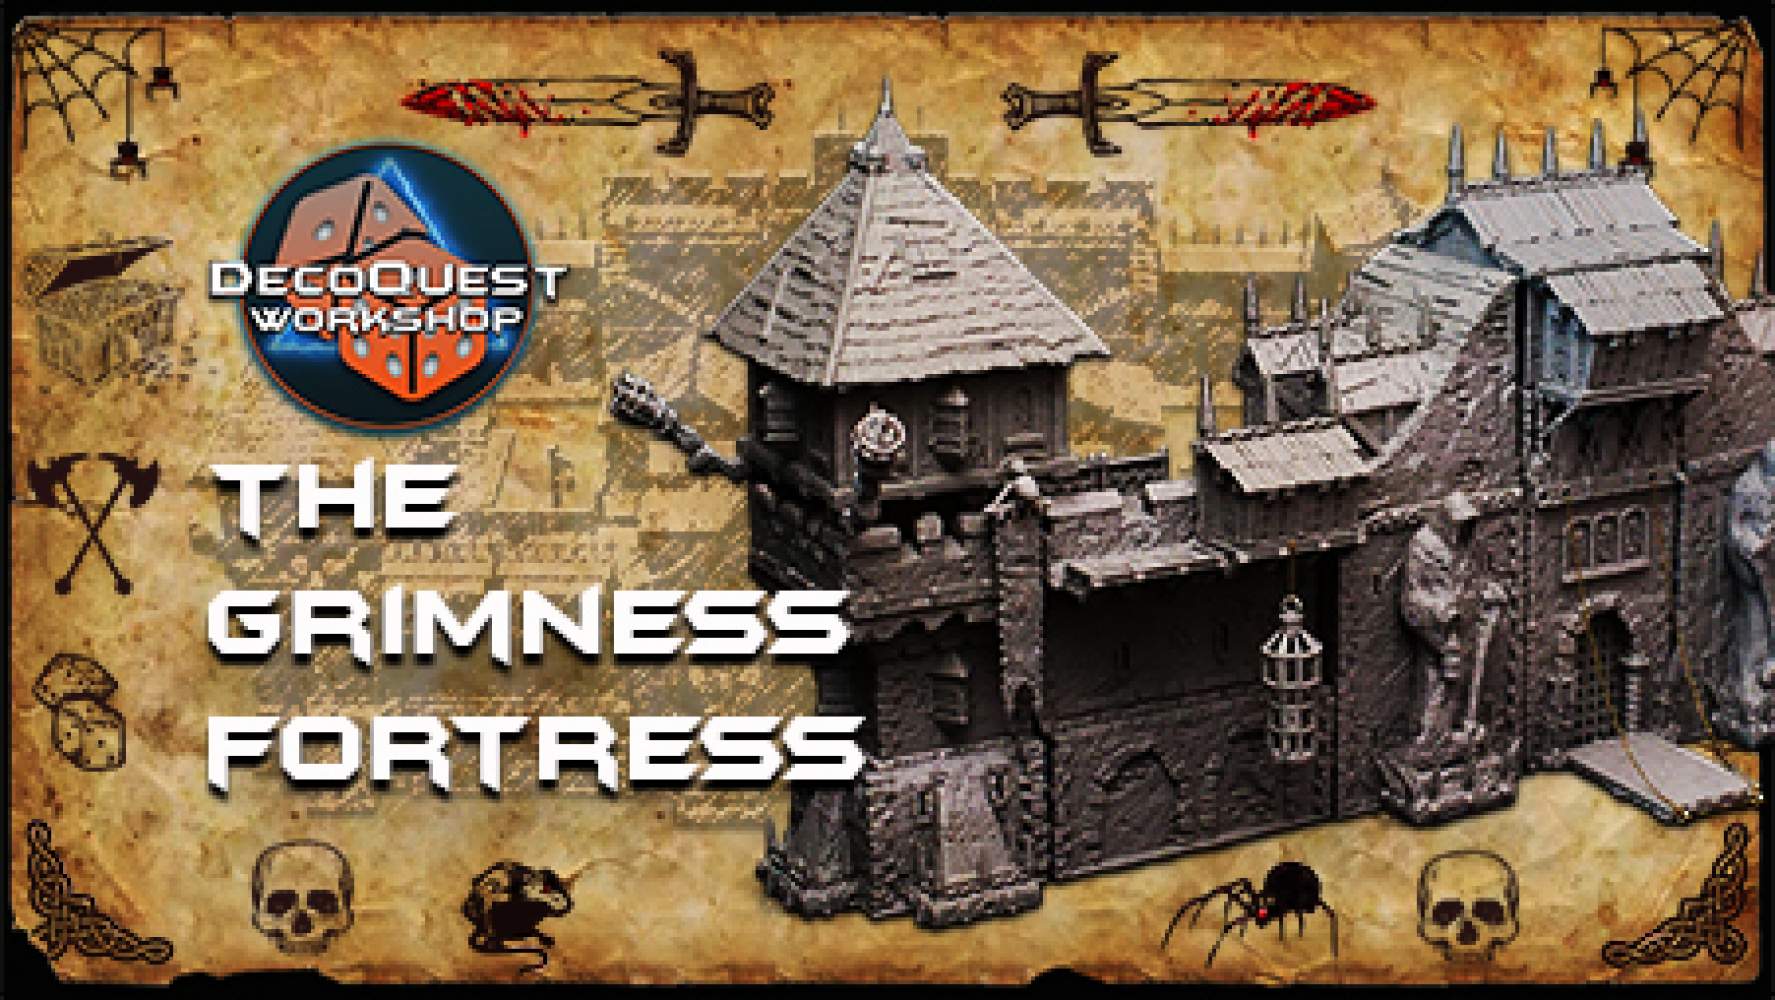 The Grimness Fortress